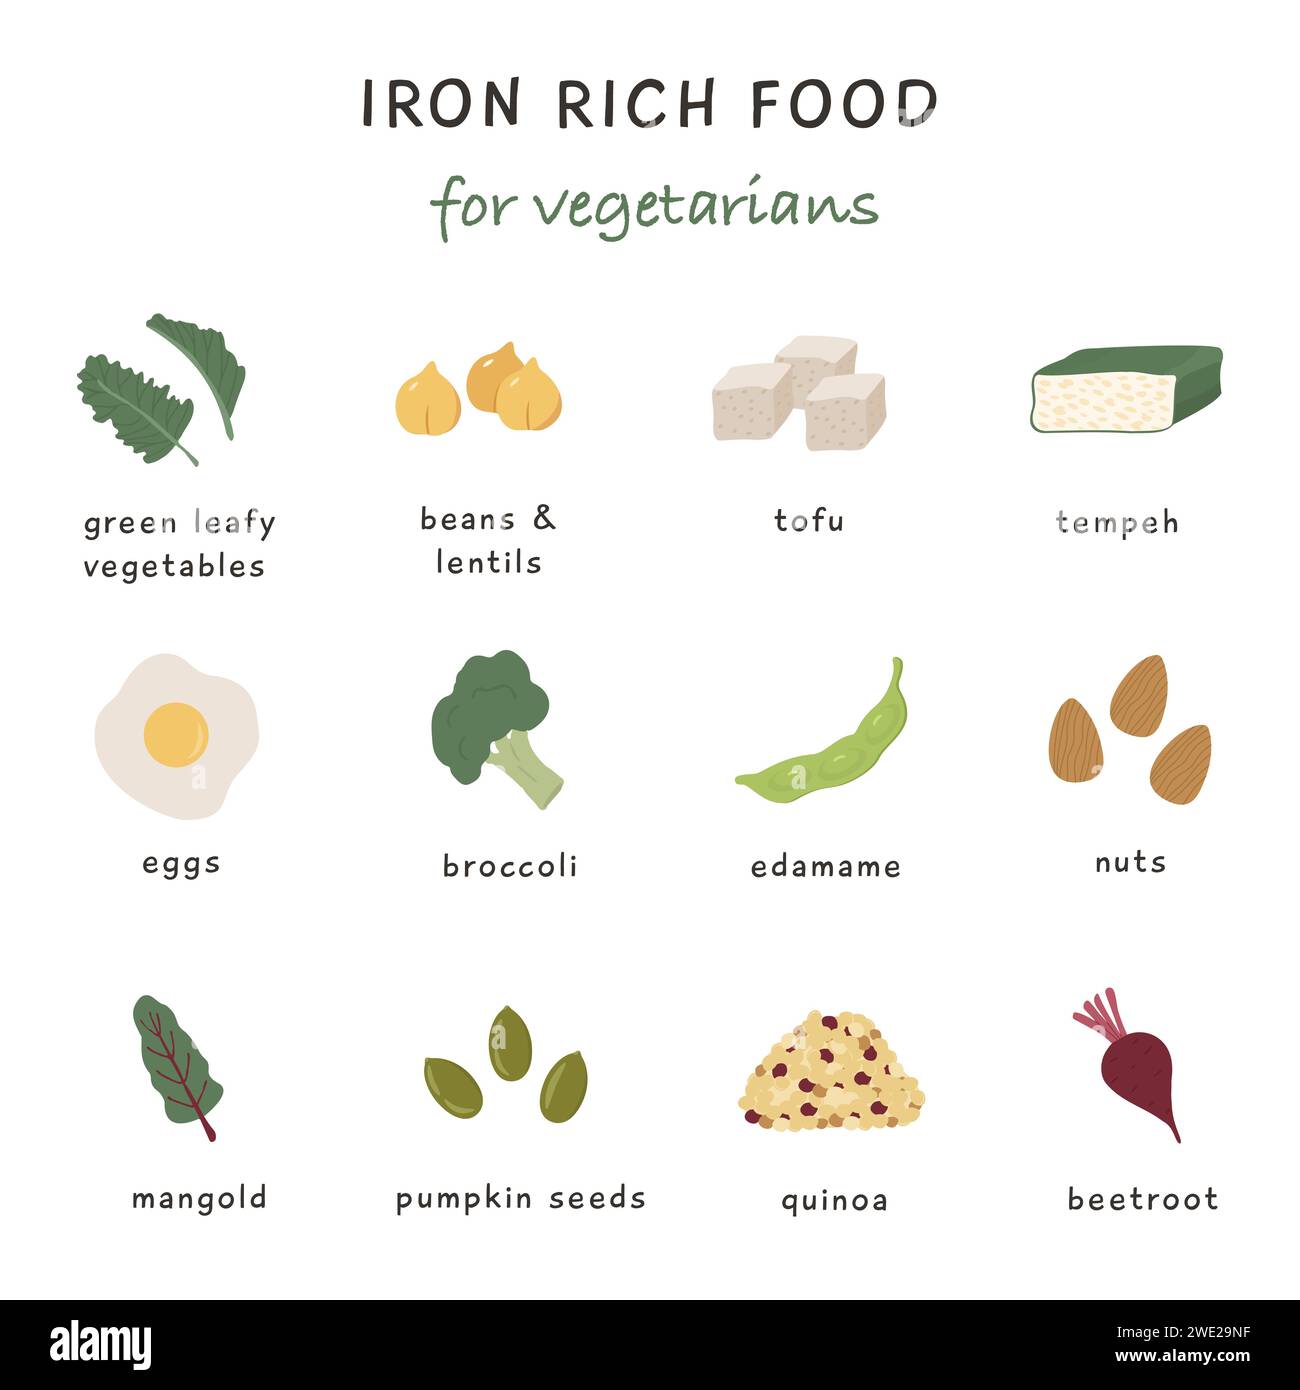 Iron rich food sources for vegetarian diet. Collection of food containing Iron. Soy product, chocolate, kale, lentils and nuts. Dietetic organic nutri Stock Vector